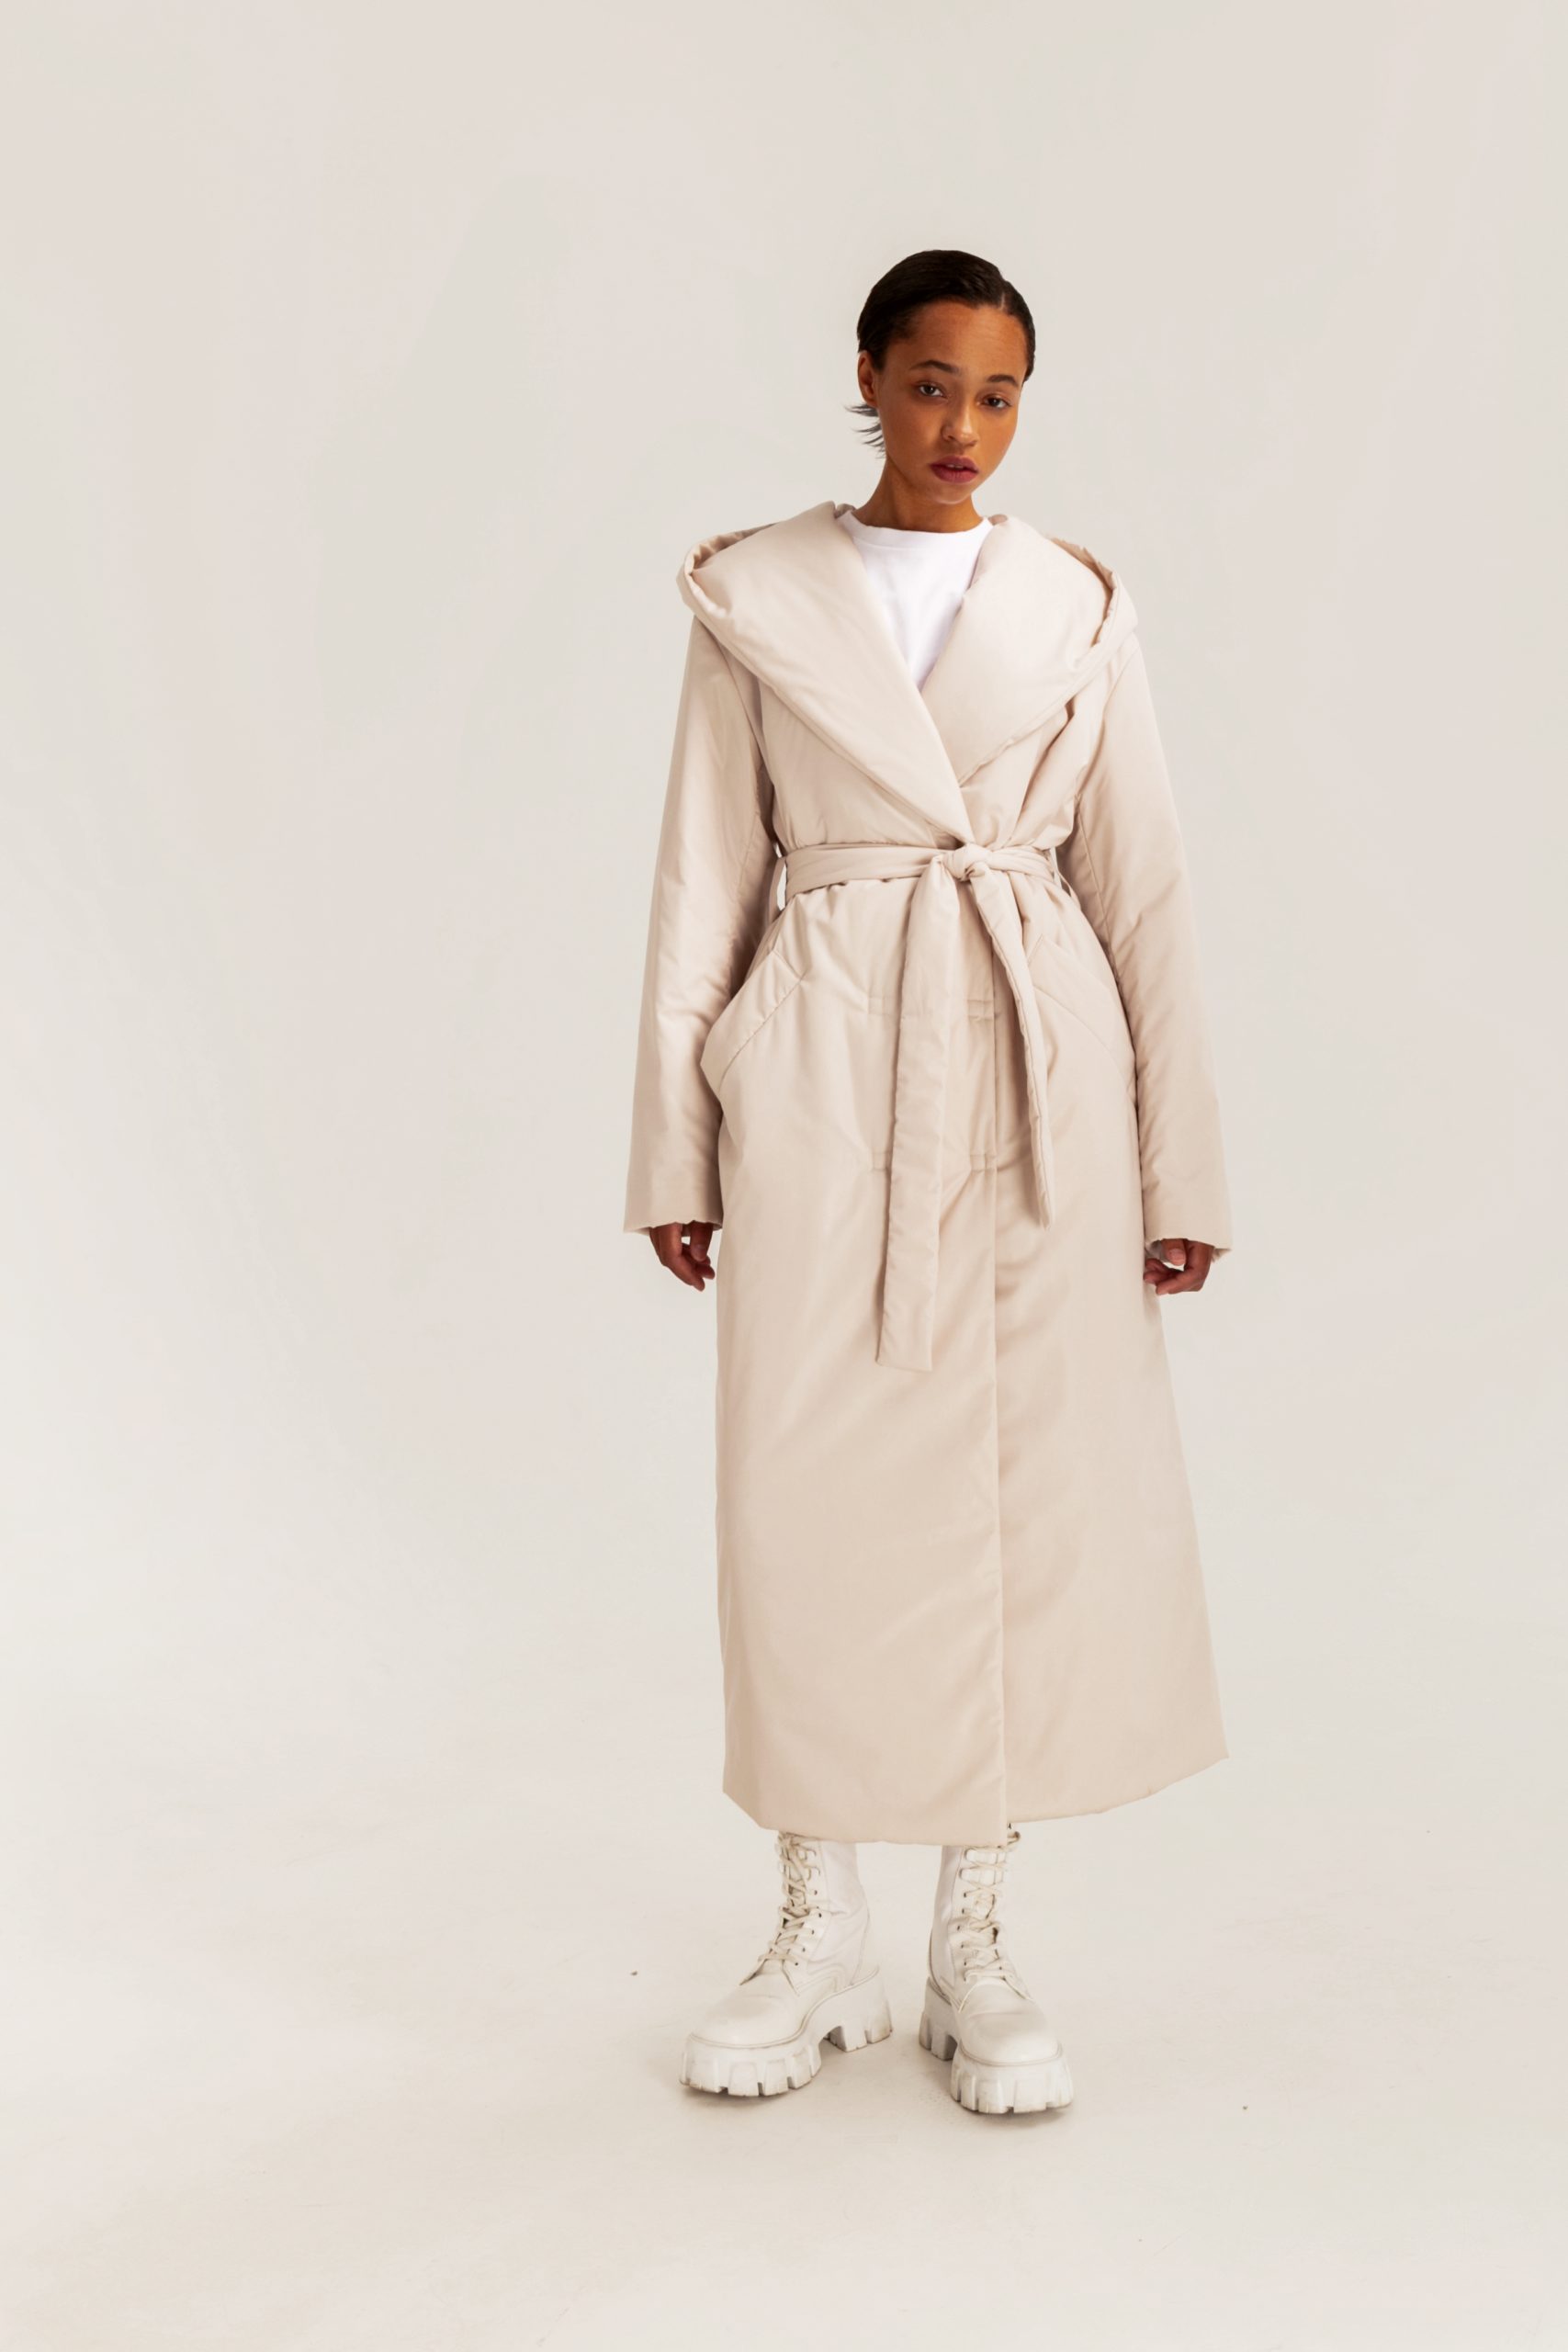 Woman wearing the Reggie Coat sewing pattern from Vikisews on The Fold Line. A puffer coat pattern made in blended raincoat fabrics, outerwear fabrics, or Dewspo fabrics, featuring a loose fit, straight cut, welt pockets, grown-on hood, bust darts, long loose fitting two-piece sleeves, double-breasted, sew-on snap closure, detachable tie belt, belt loops, fully lined and above-ankle length.